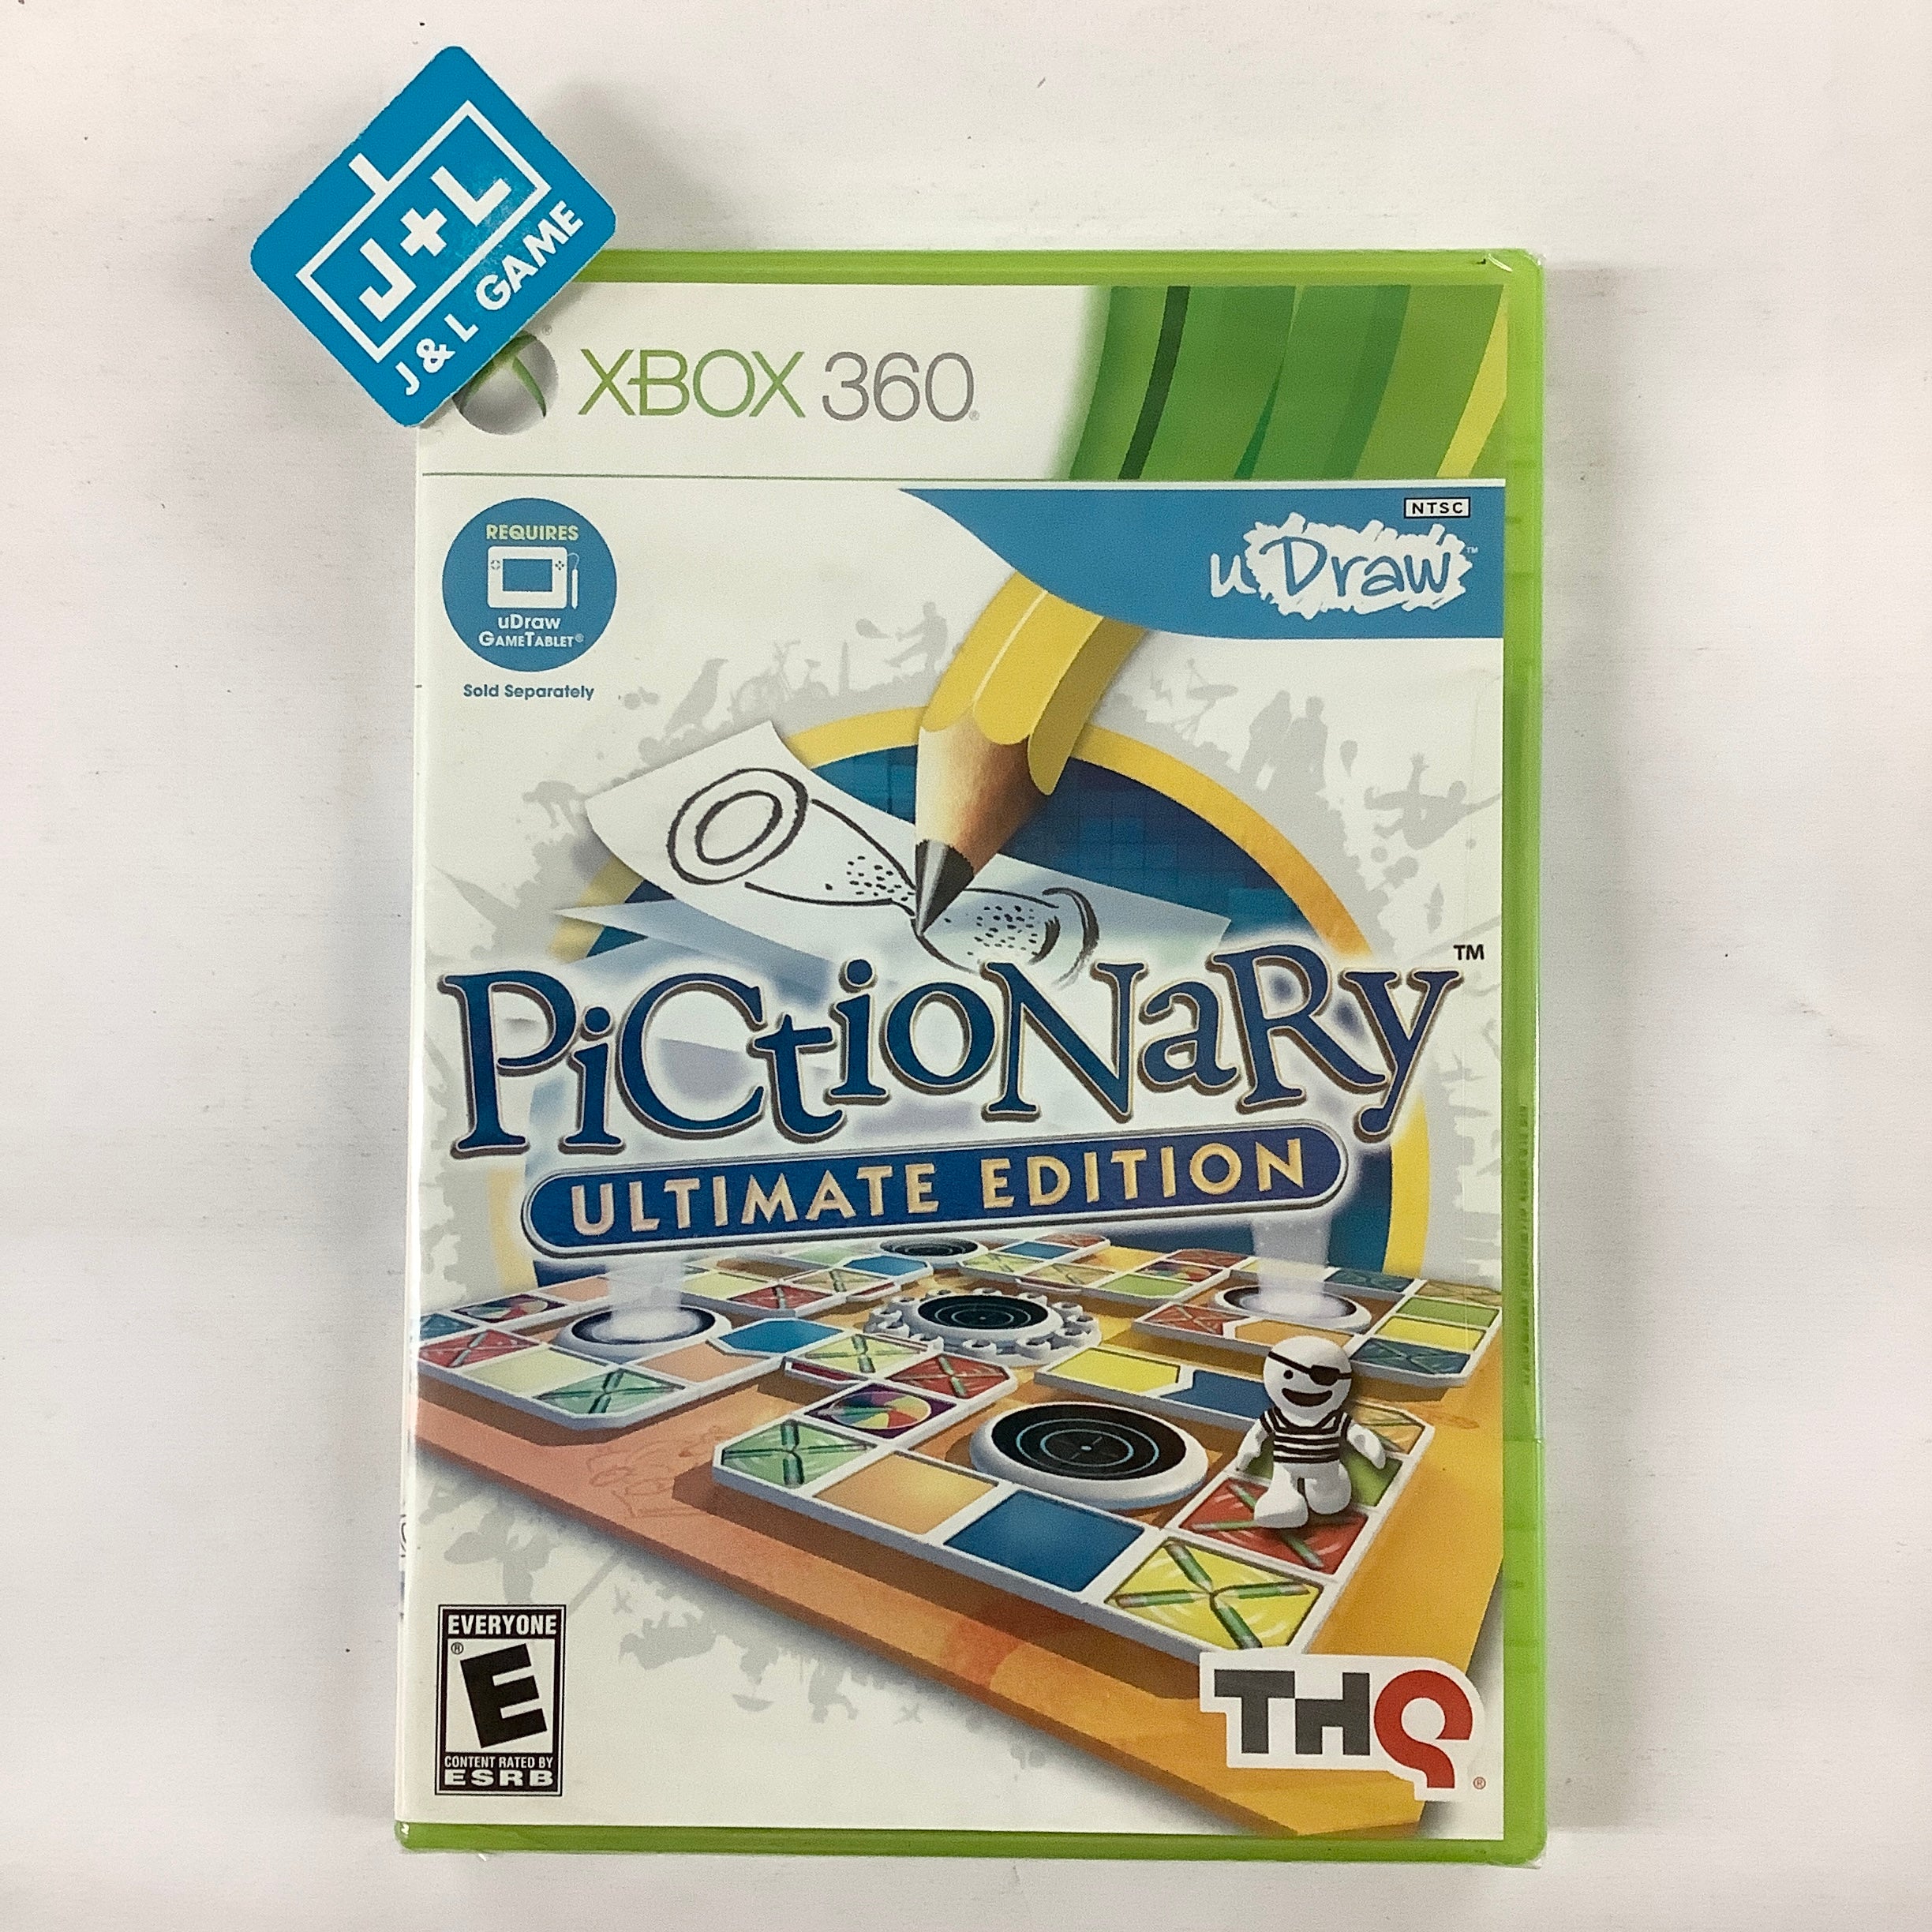 uDraw Pictionary: Ultimate Edition (Requires uDraw Tablet) - Xbox 360 Video Games THQ   